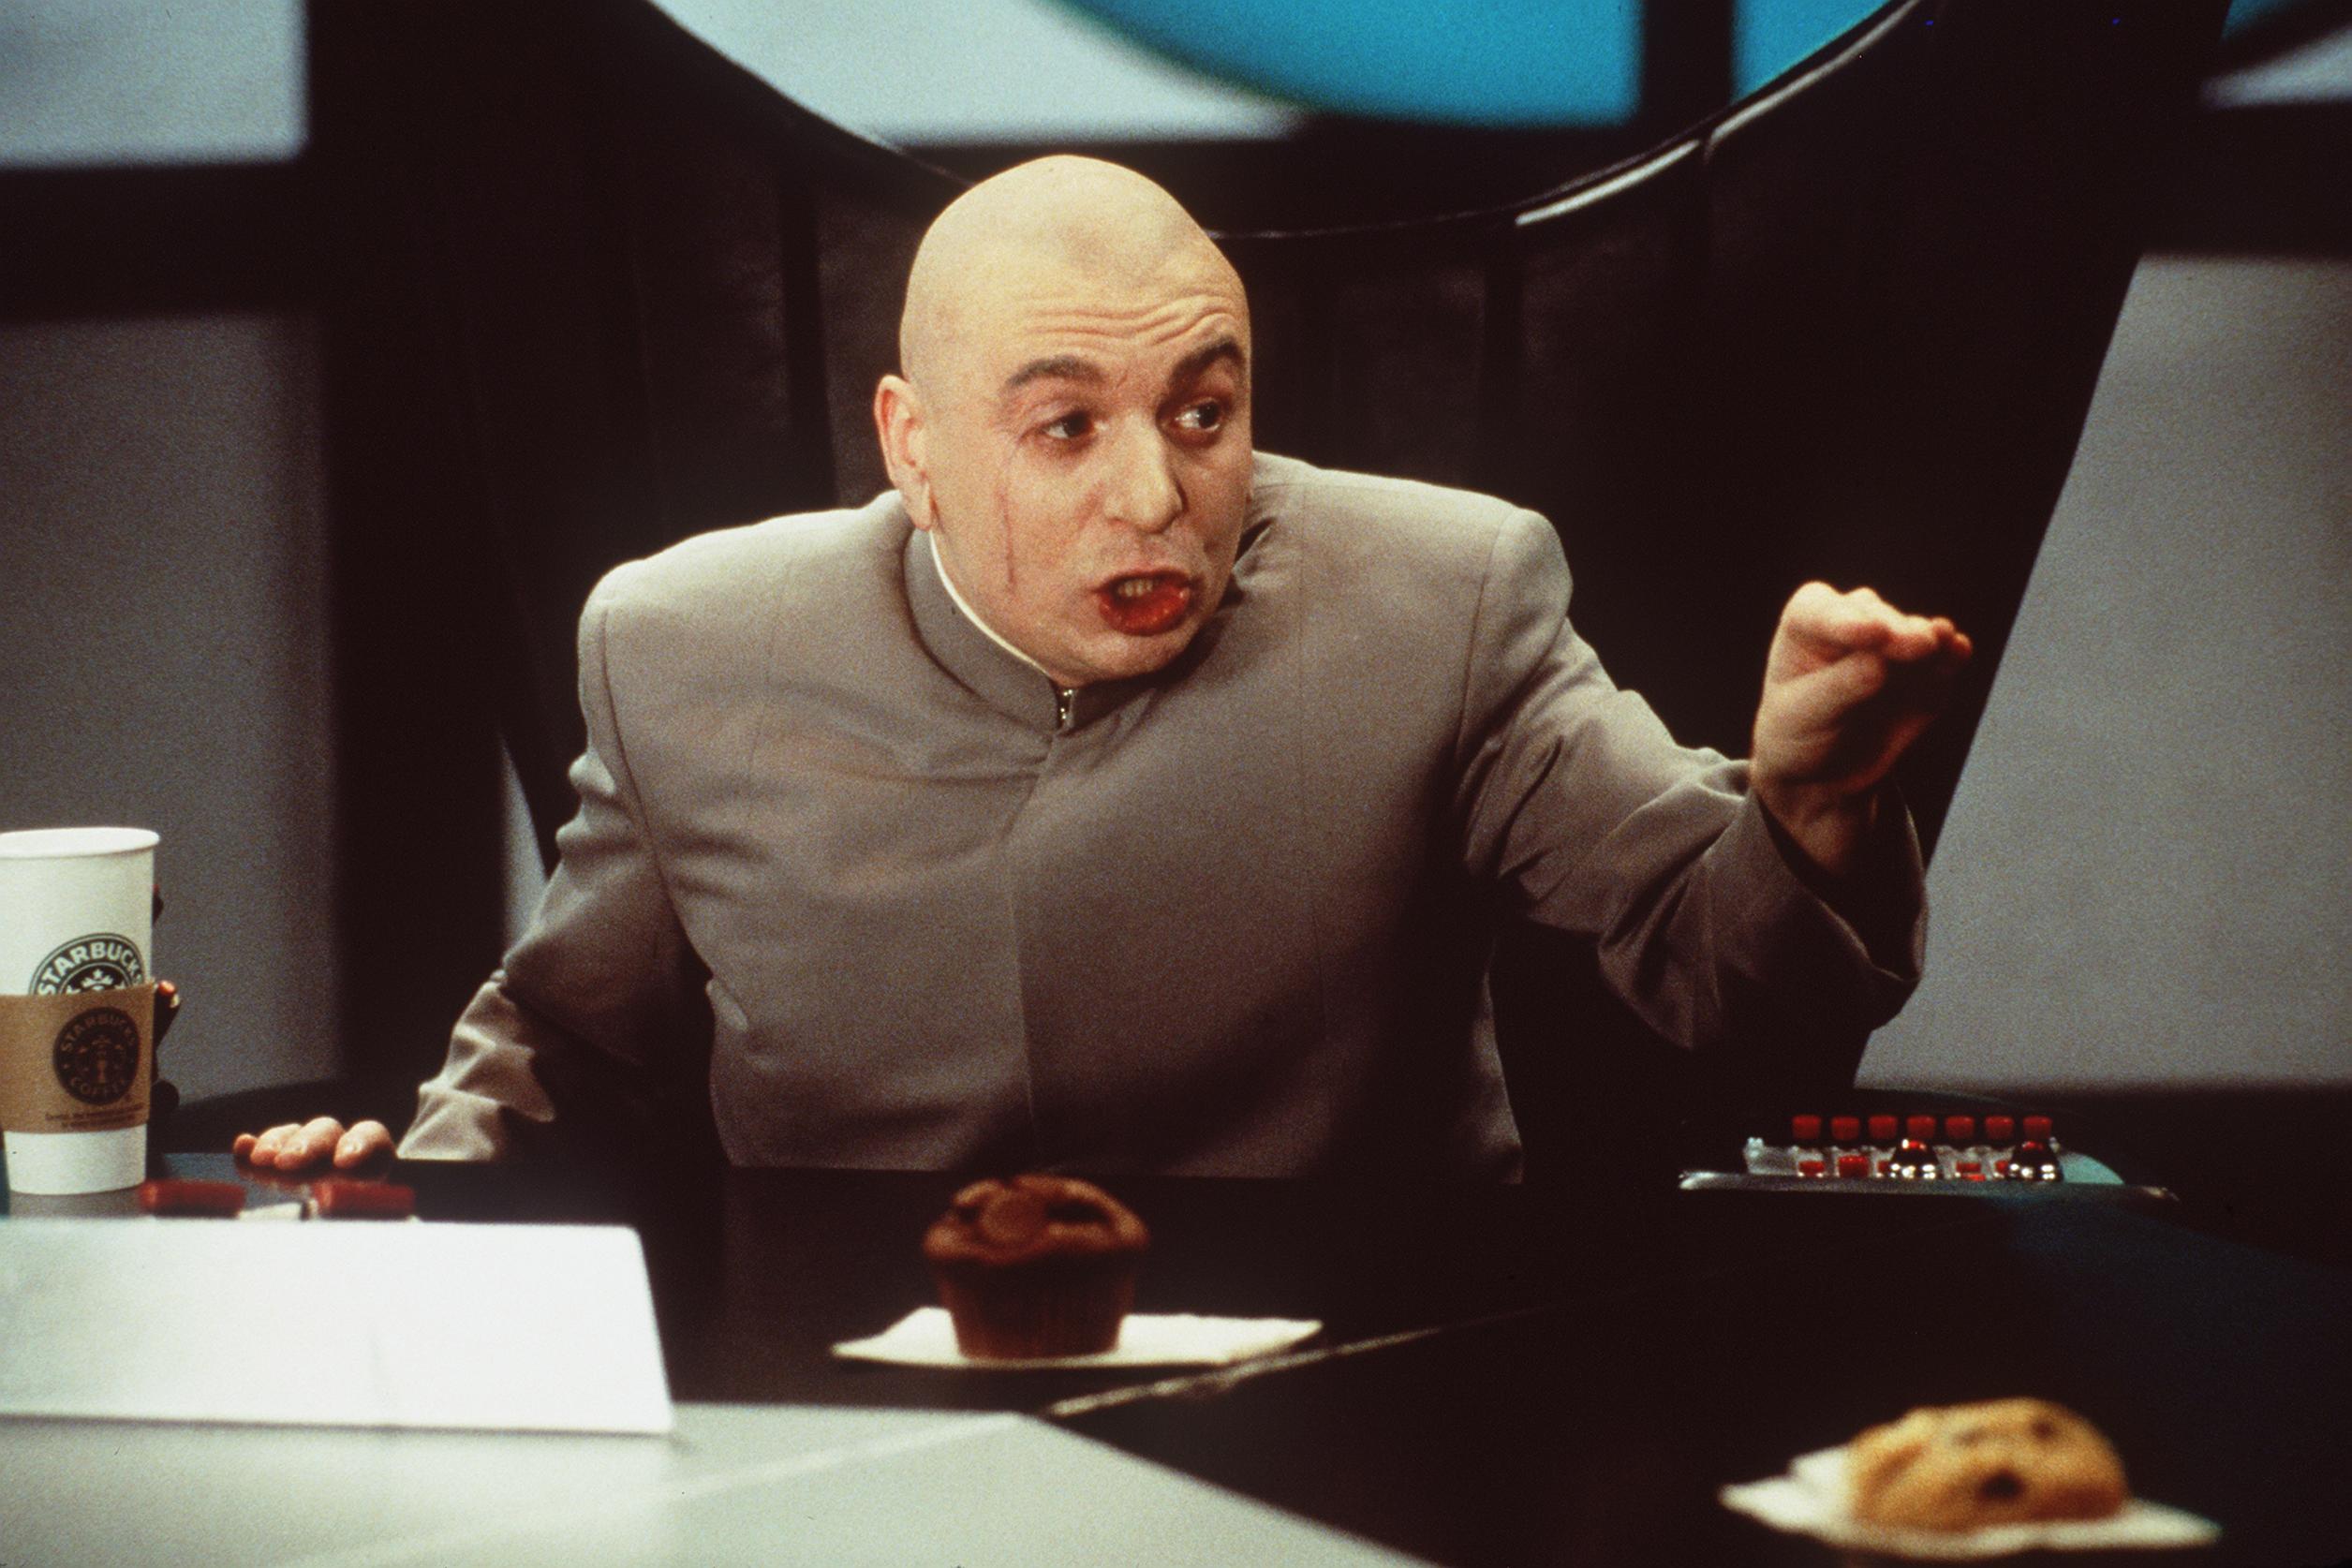 Mike Meyers Stars As "Dr. Evil" In "Austin Powers: The Spy Who Shagged Me.", 1999 | Source: Getty Images